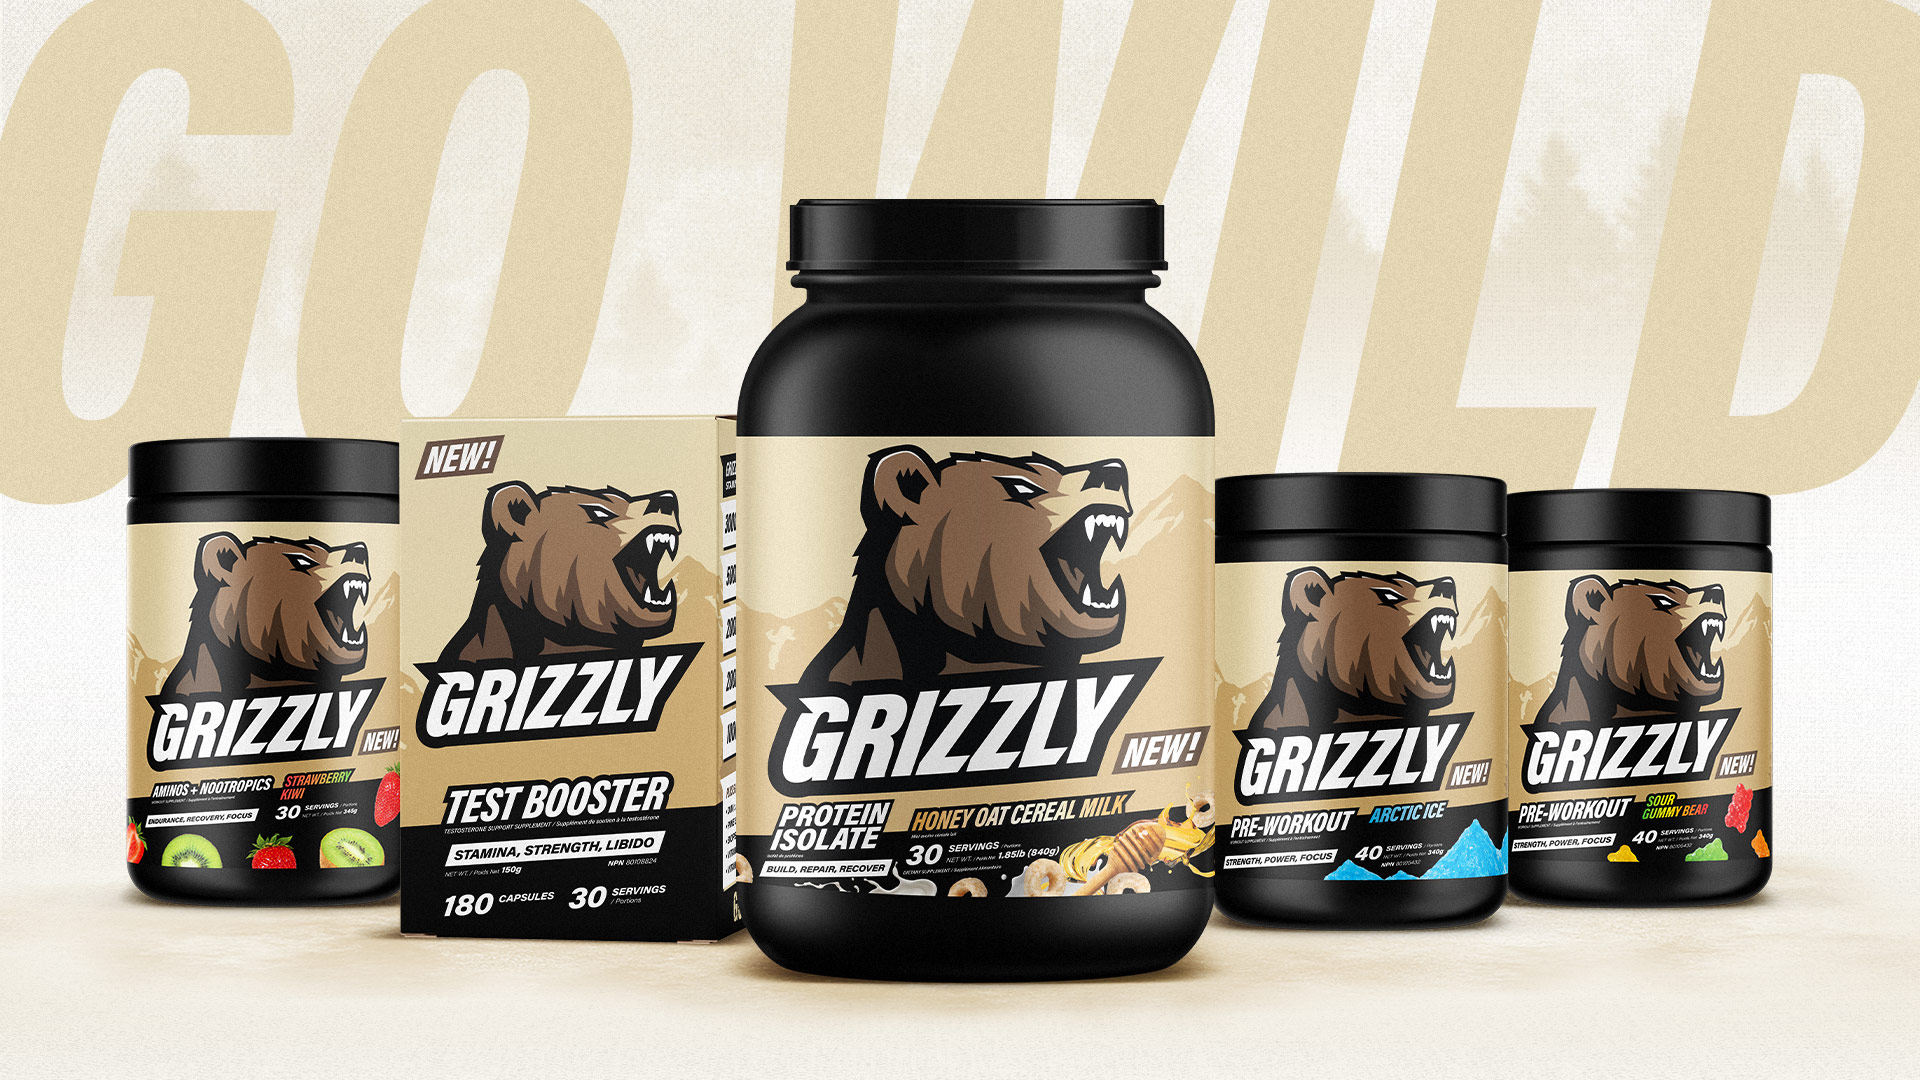 Grizzly—Supplements for Adventure Seekers